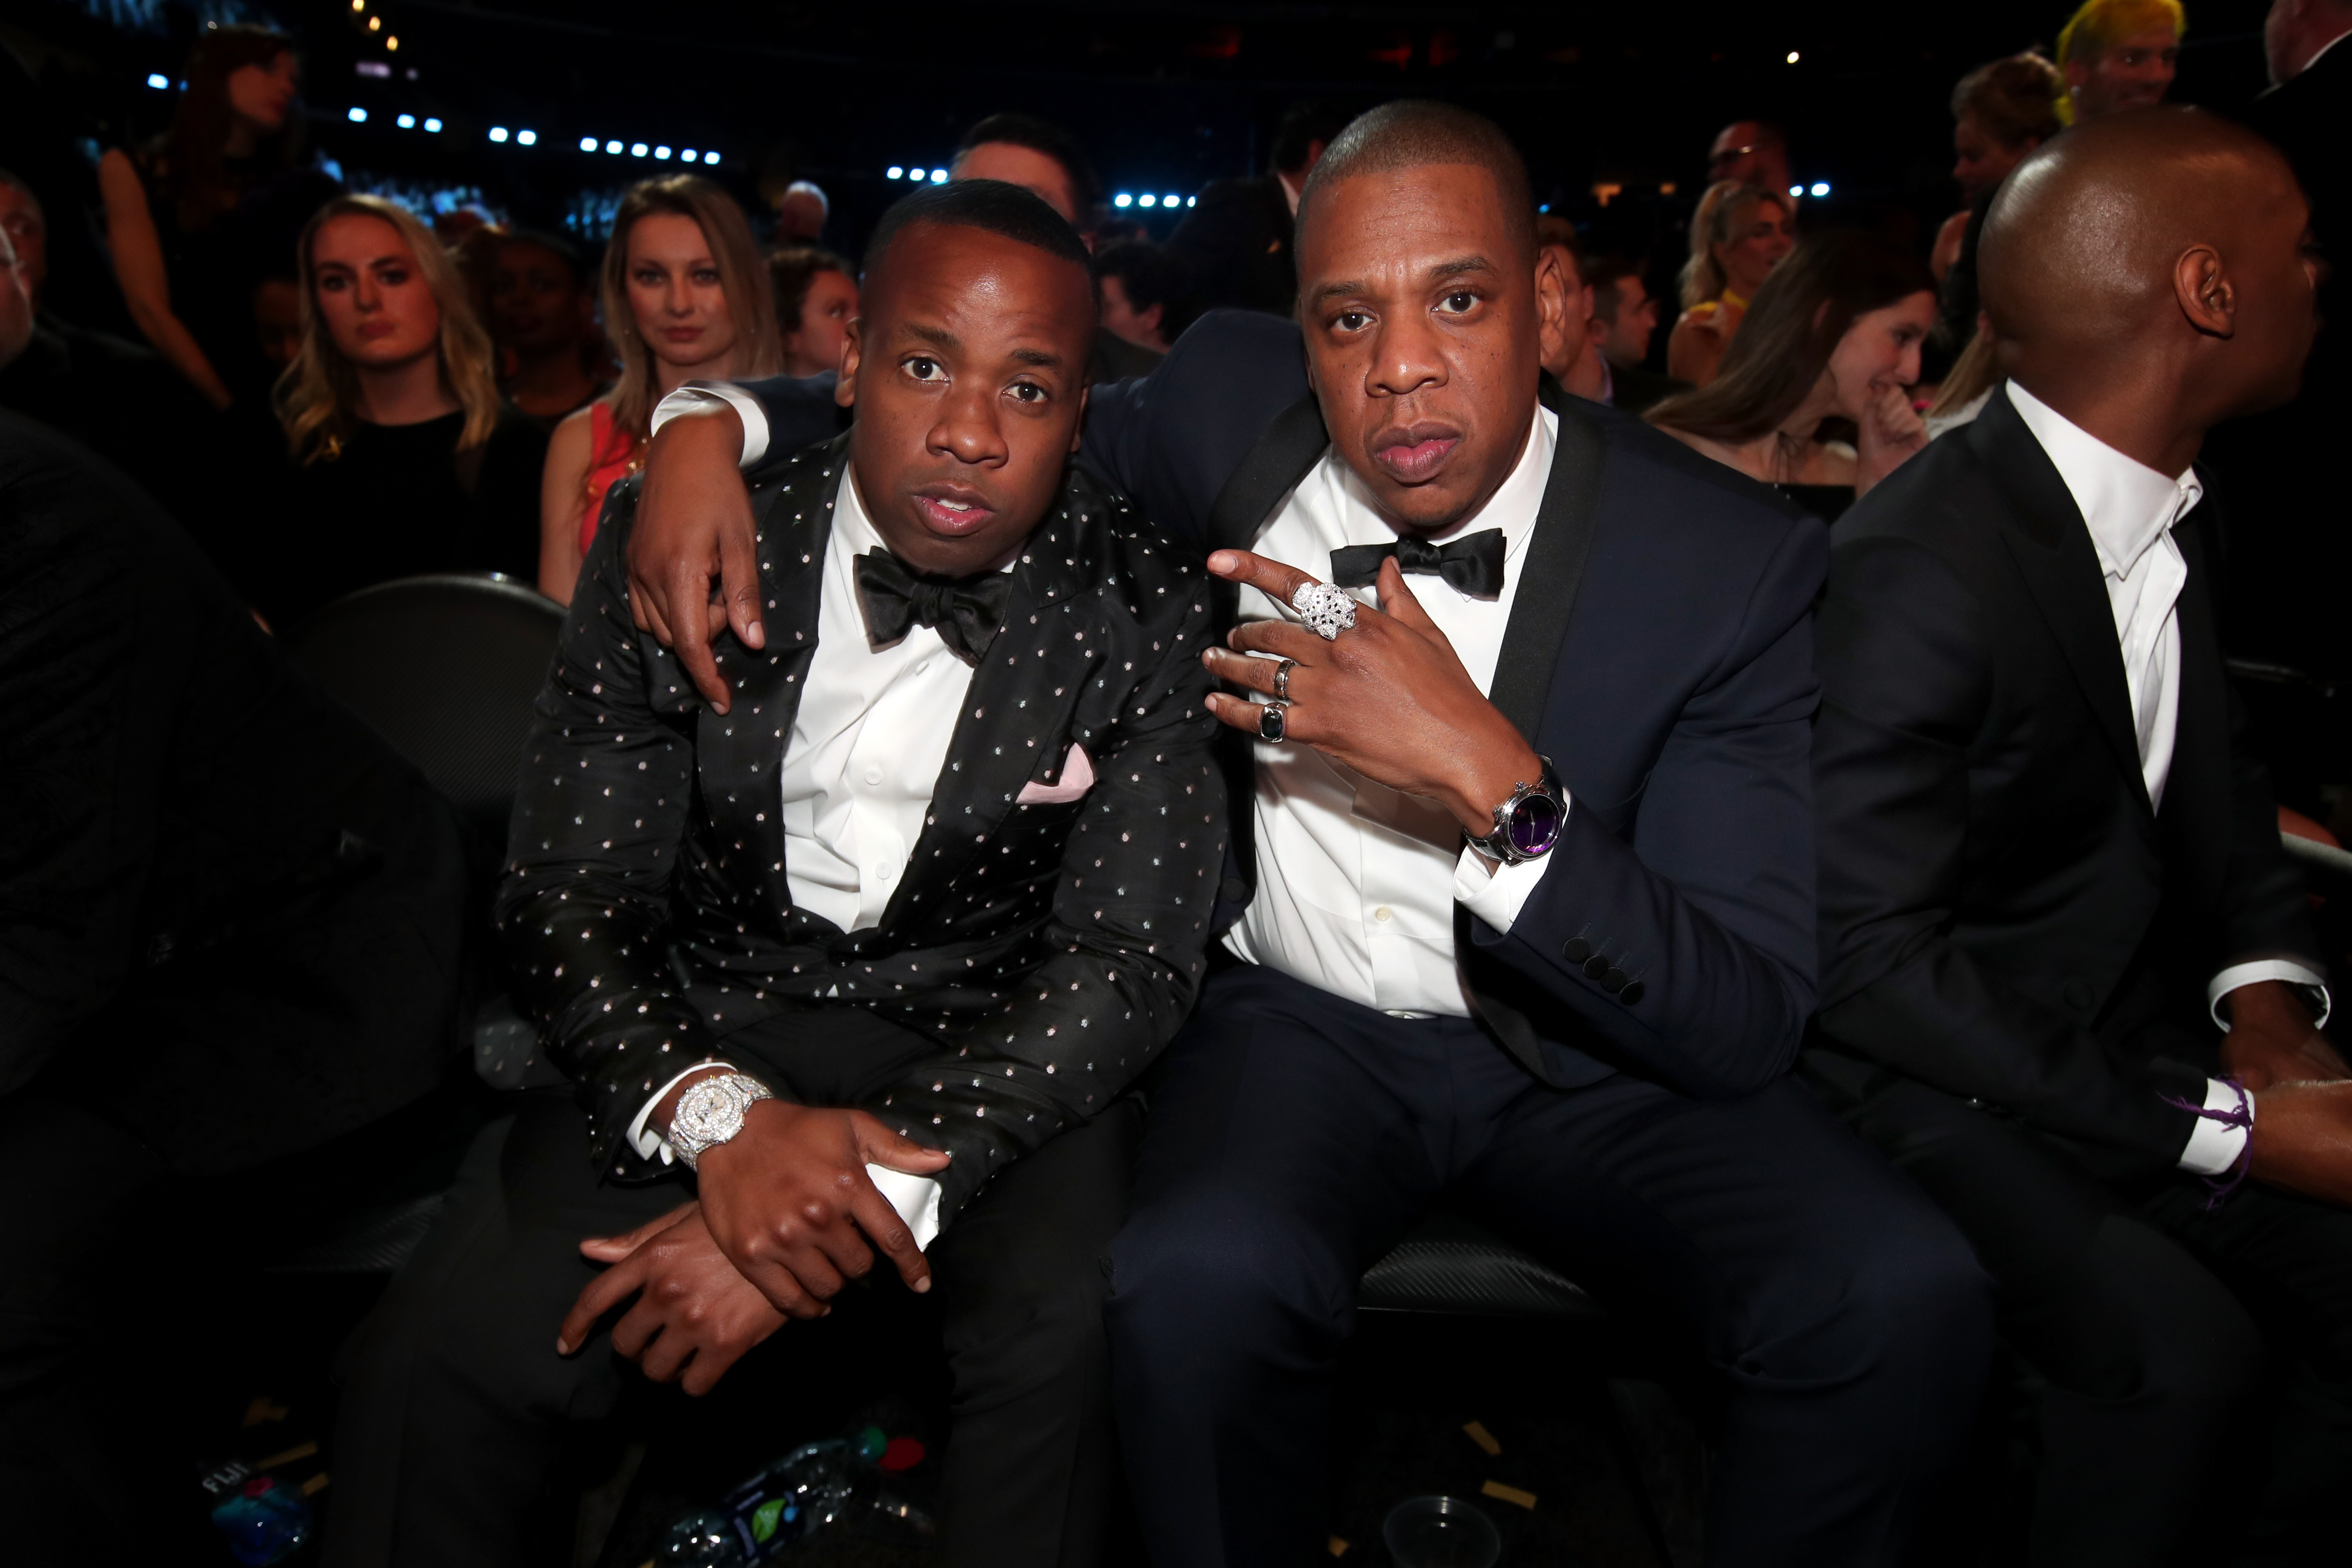 Hip Hop Artists Yo Gotti and Jay-Z during The 59th GRAMMY Awards at STAPLES Center on February 12, 2017 in Los Angeles, California. (Photo by Christopher Polk/Getty Images for NARAS)